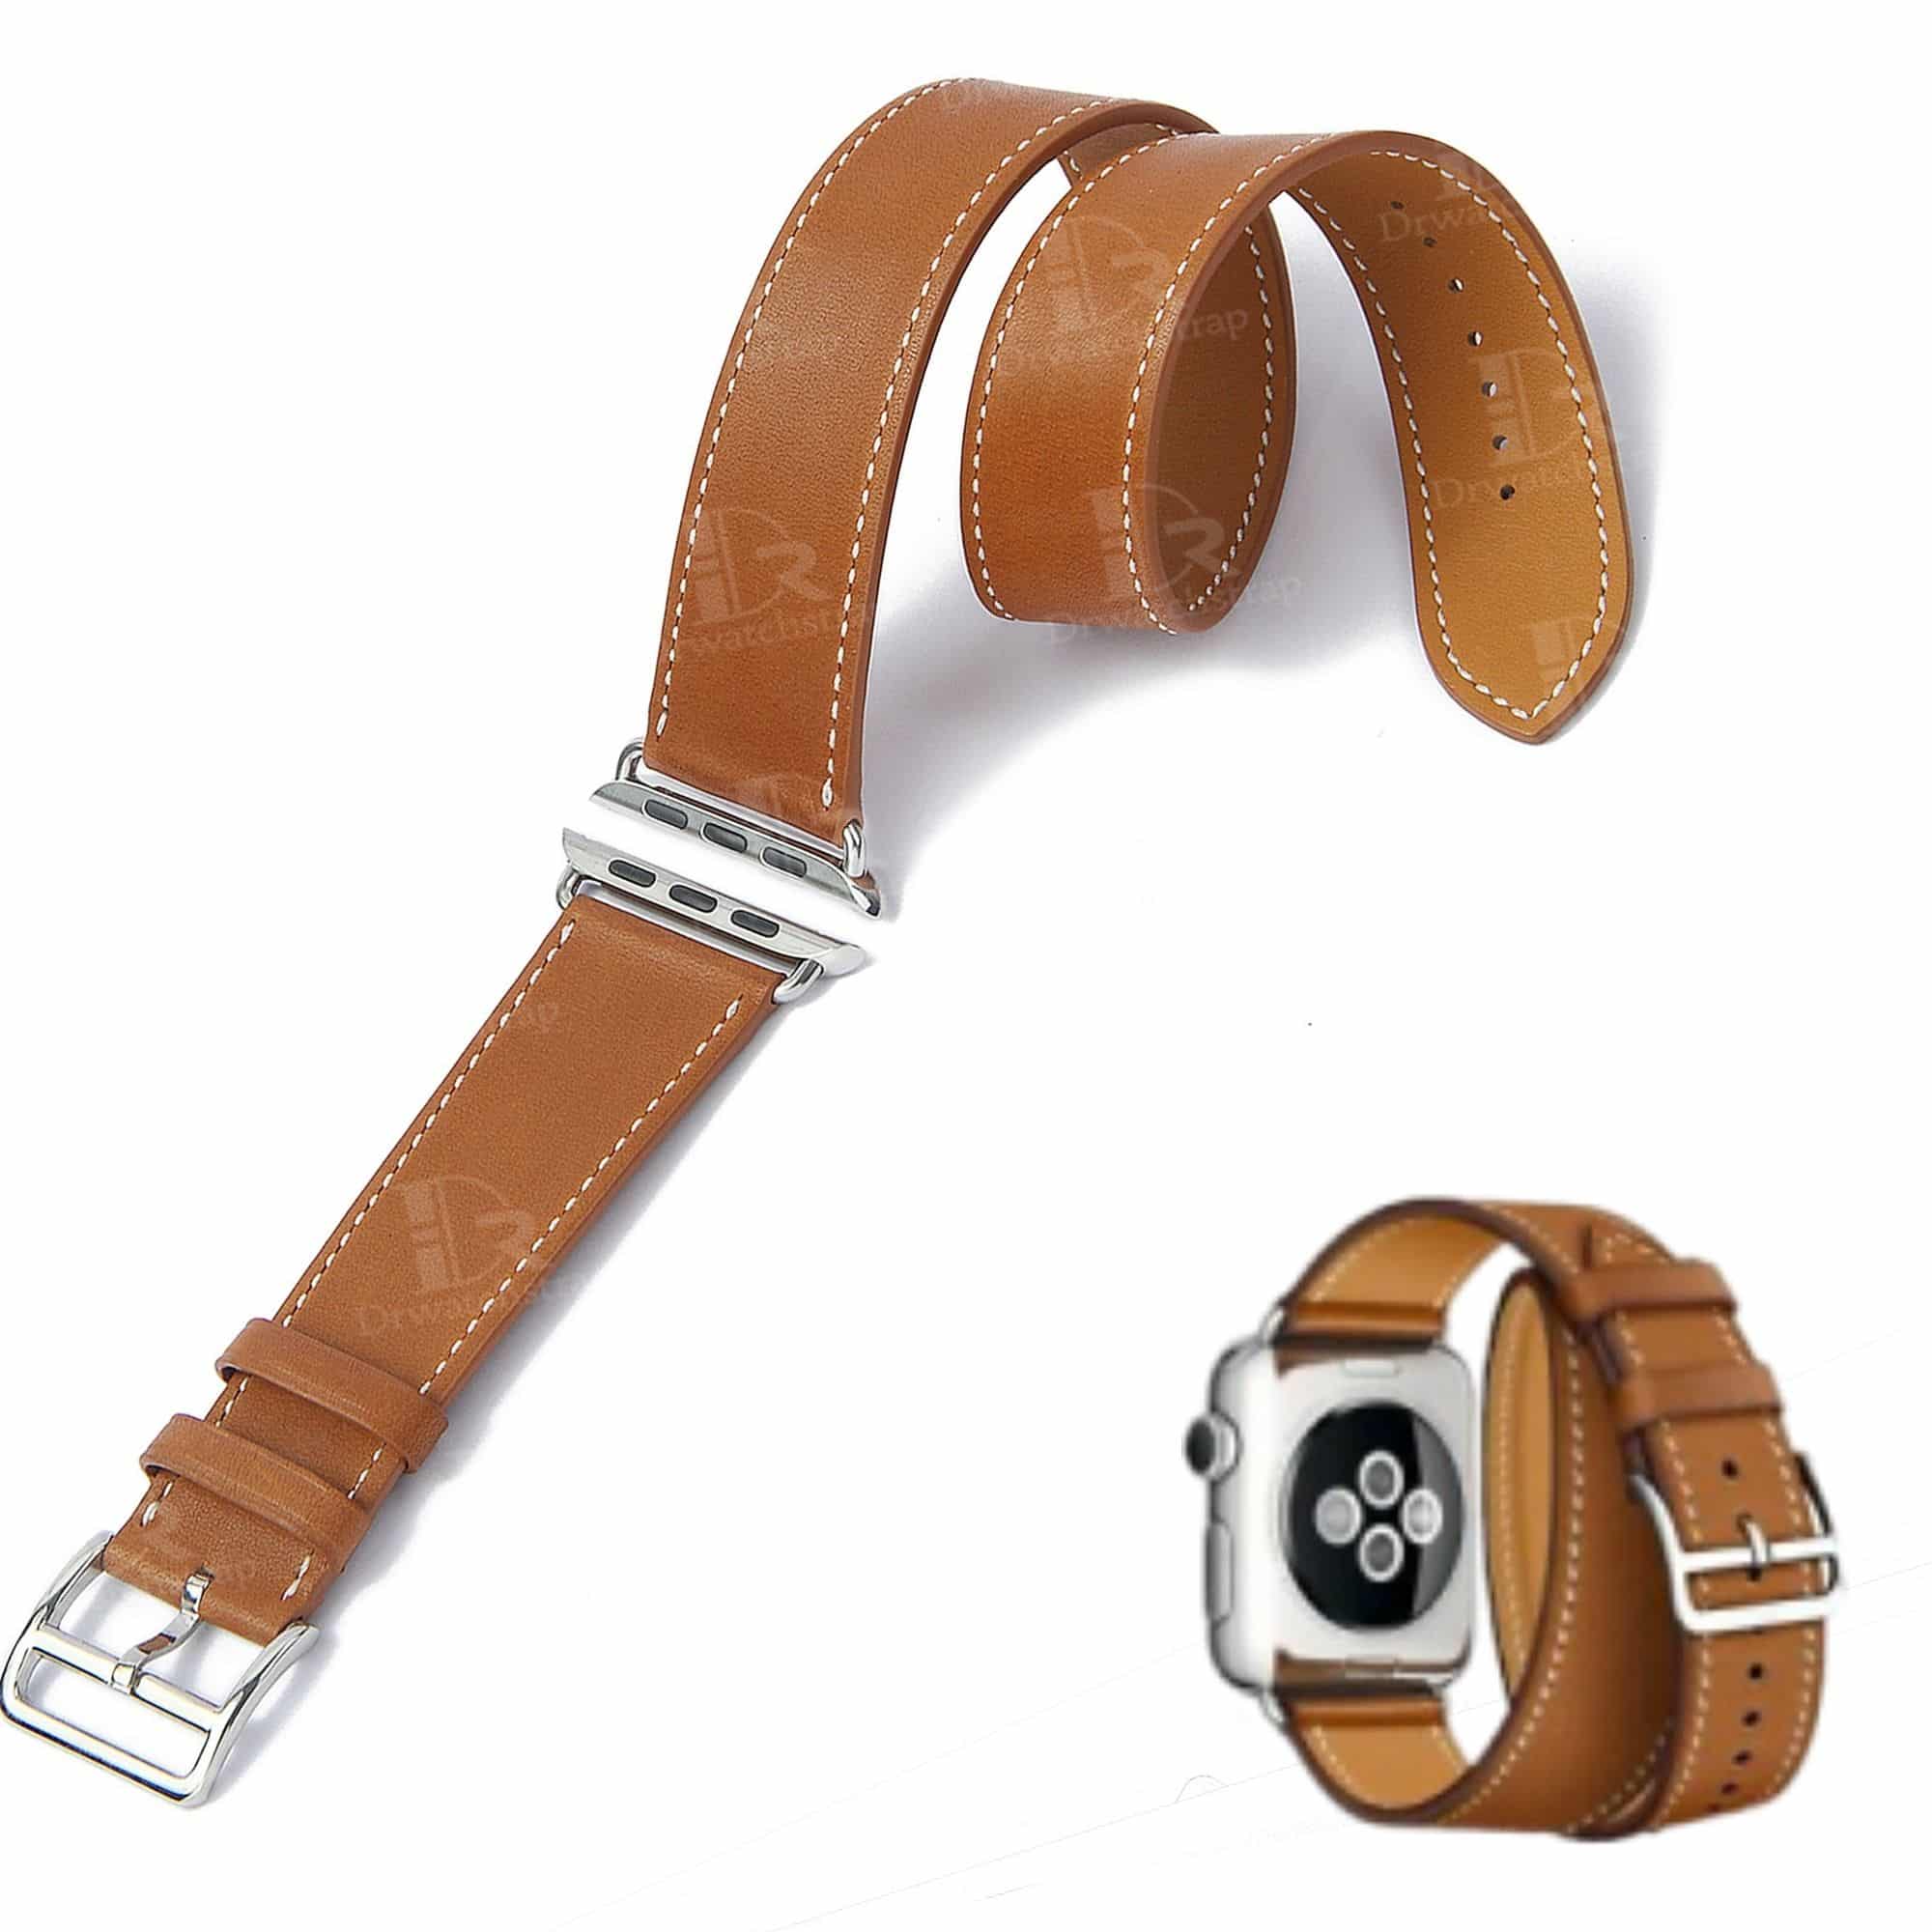 Double loop leather watch band smooth brown calfskin fit for apple watch band